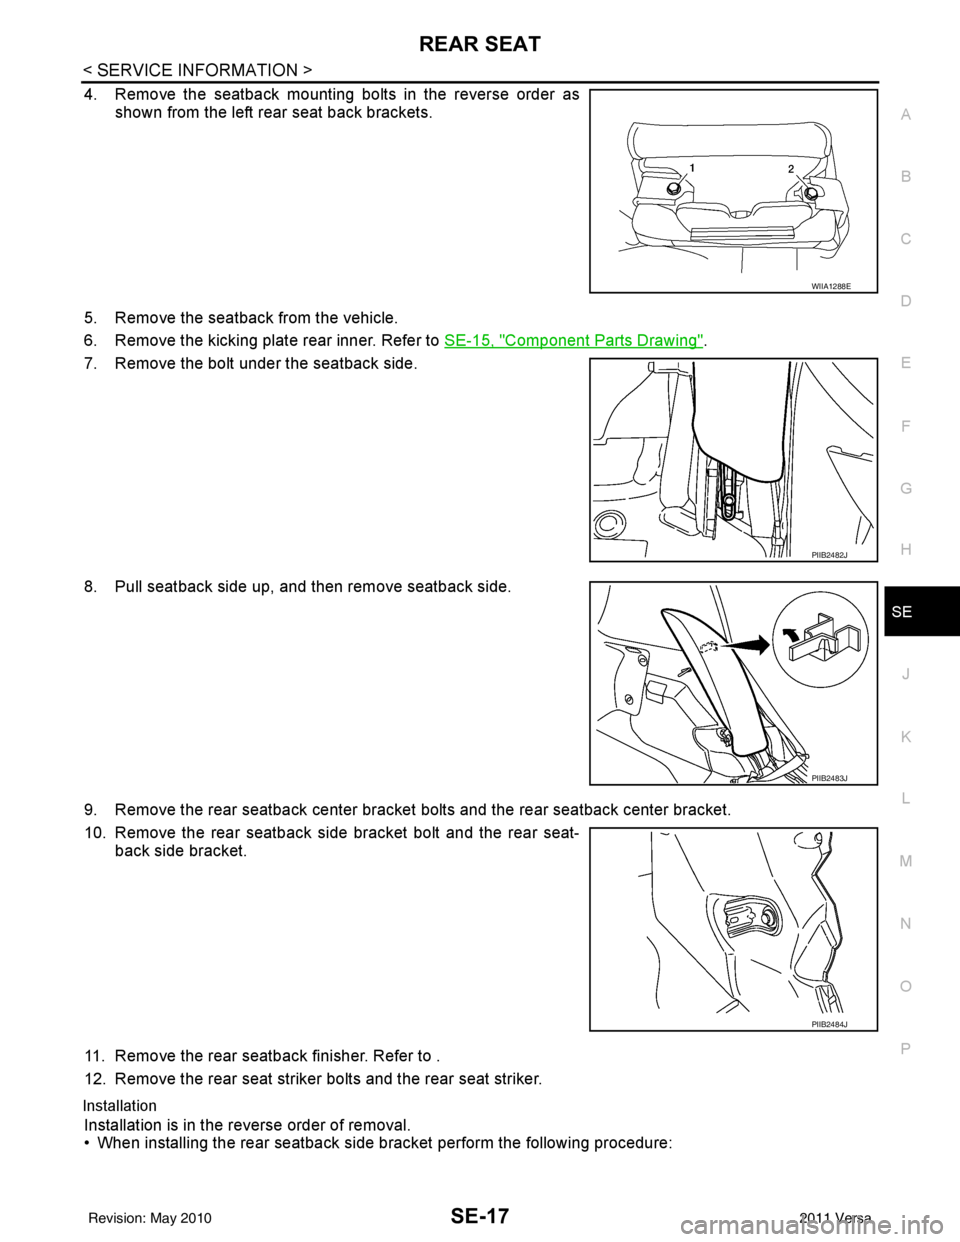 NISSAN LATIO 2011  Service Repair Manual REAR SEATSE-17
< SERVICE INFORMATION >
C
DE
F
G H
J
K L
M A
B
SE
N
O P
4. Remove the seatback mounting bolts in the reverse order as shown from the left rear seat back brackets.
5. Remove the seatback